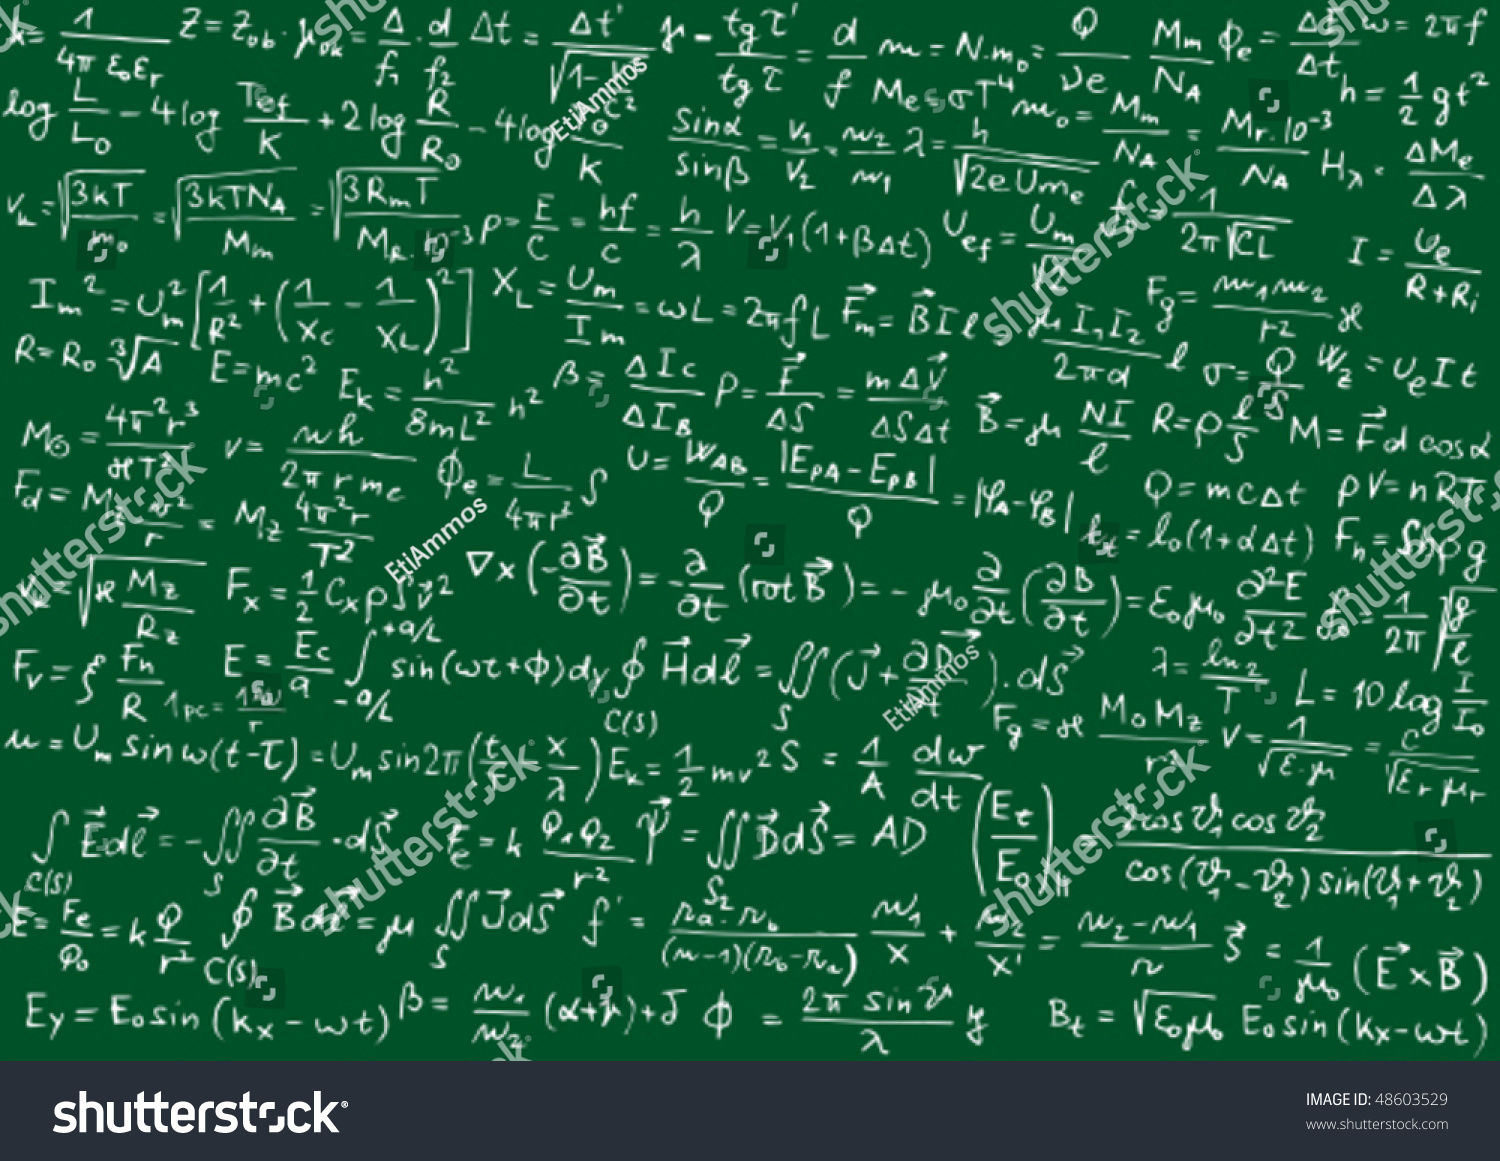 stock-vector-blackboard-with-physical-equations-and-formulas-vector-illustration-48603529.jpg